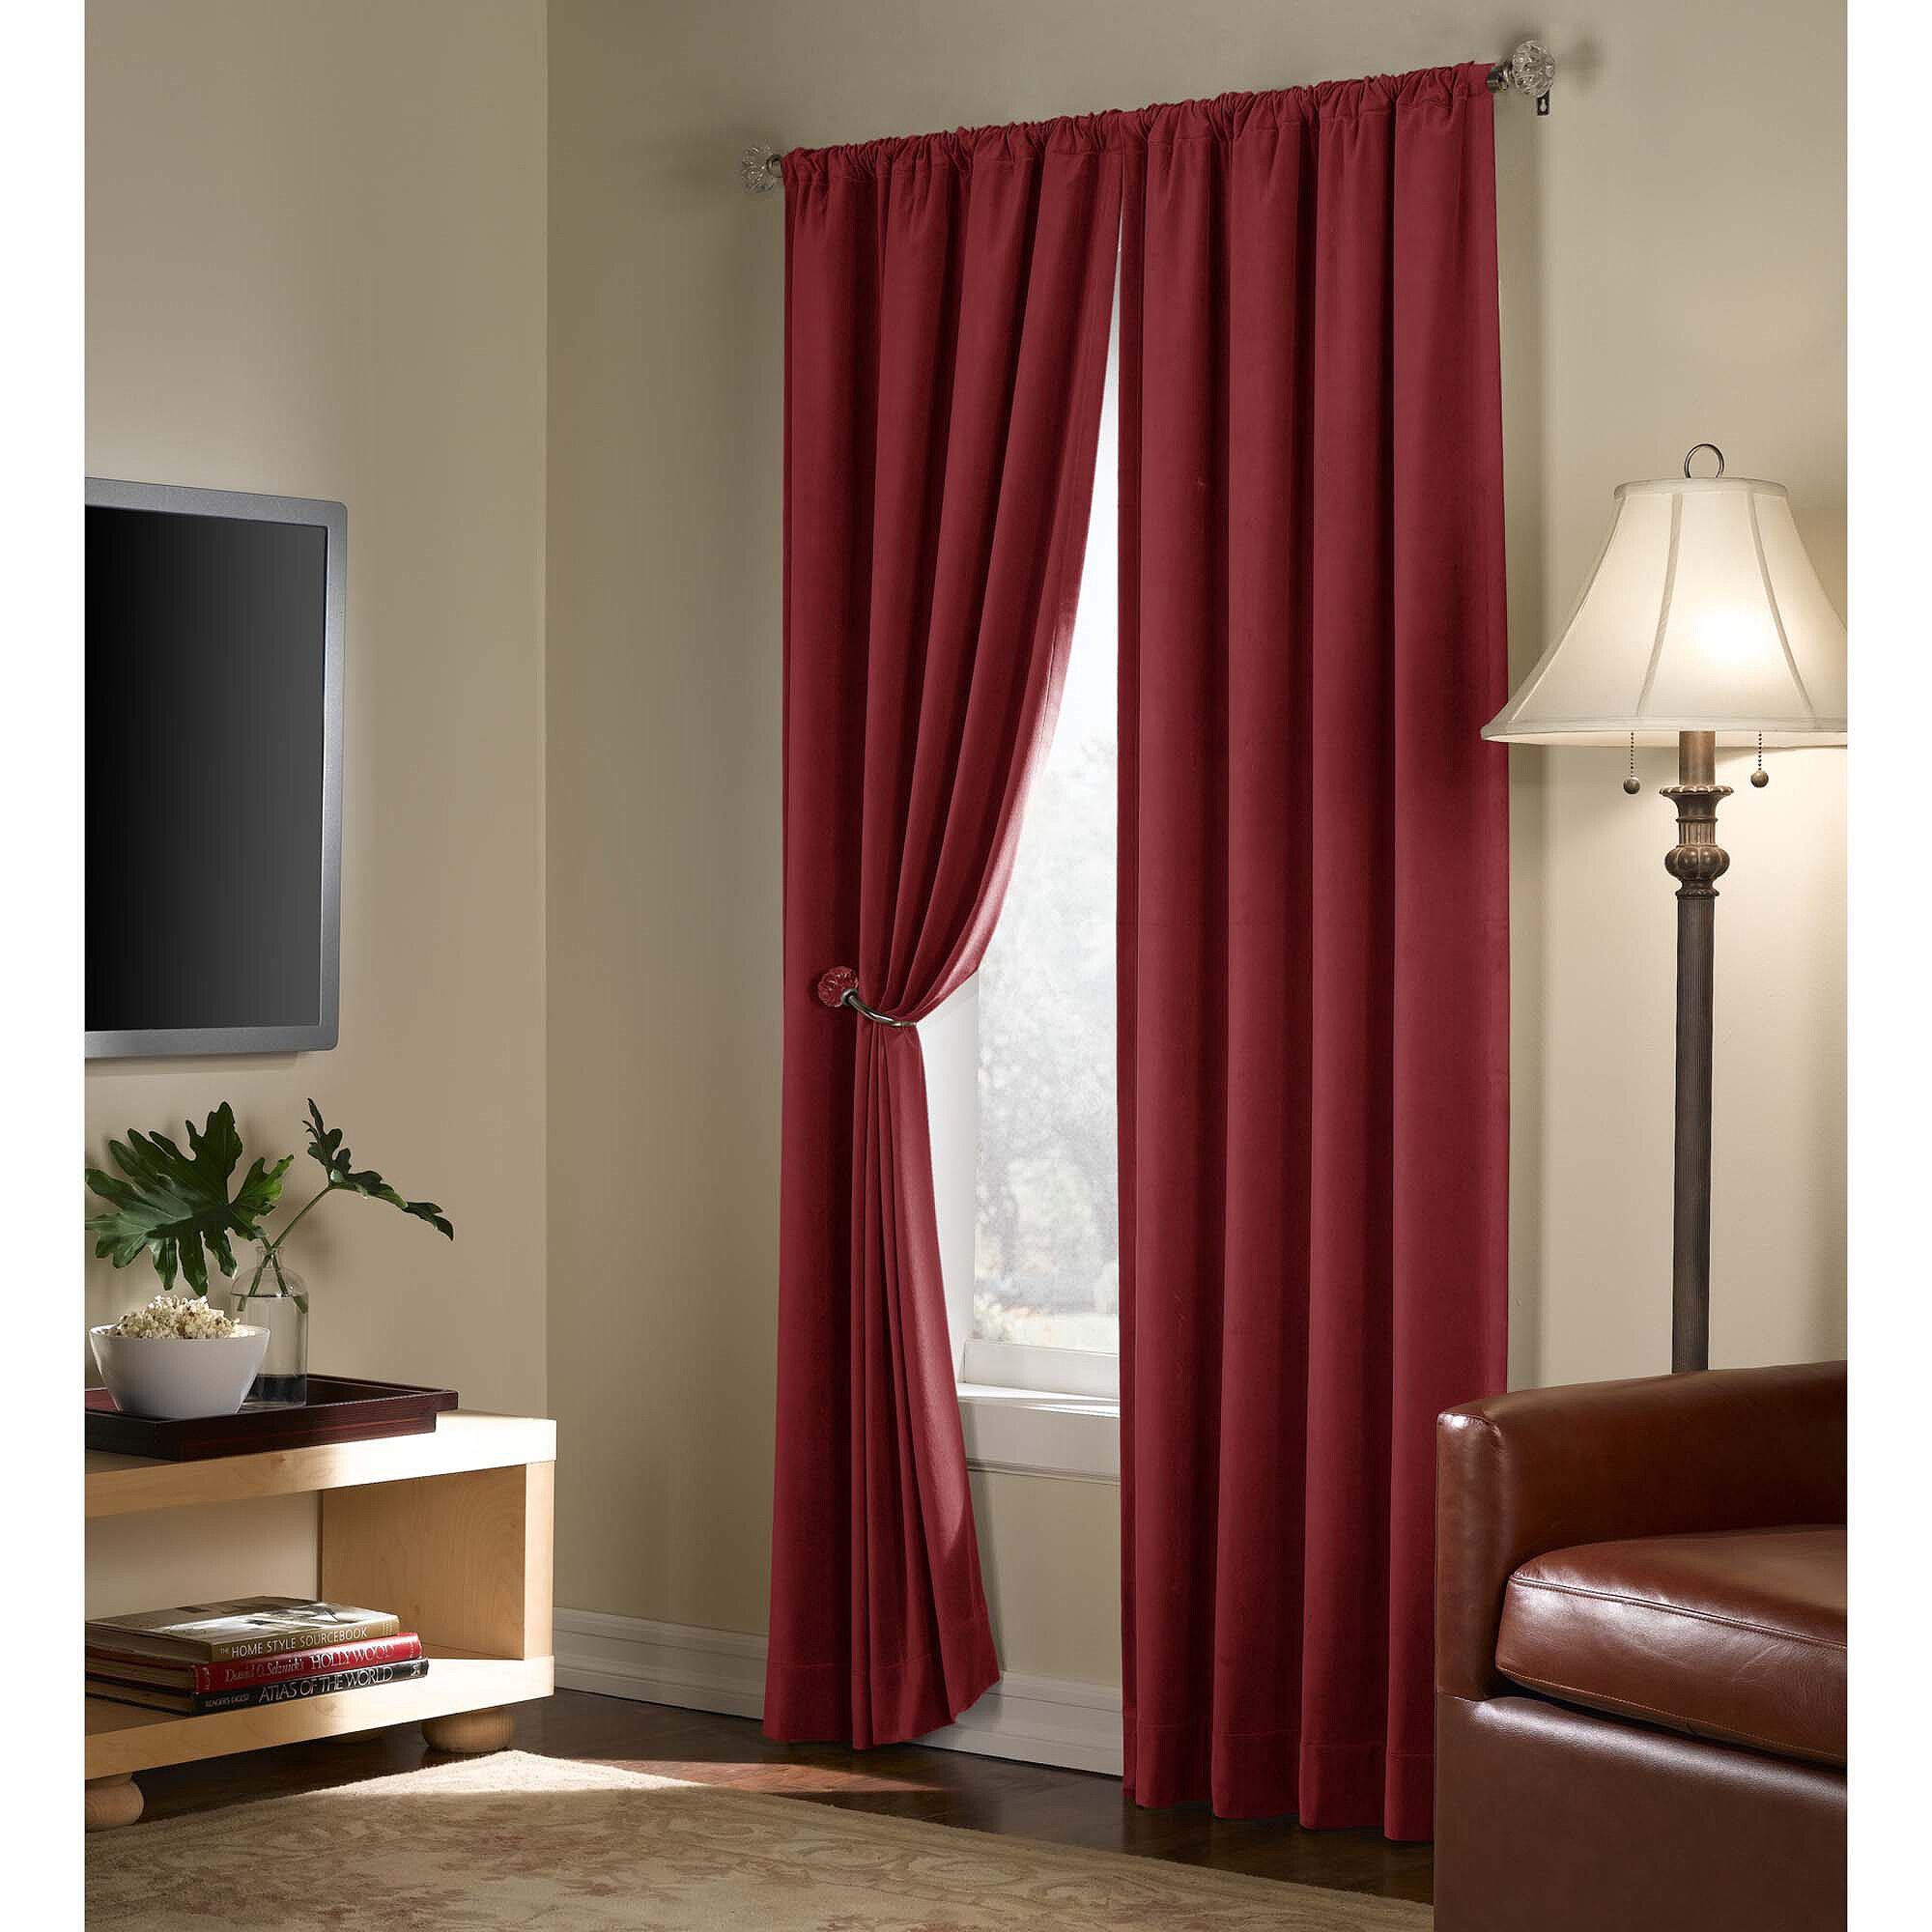 Blackout Curtains Thermal | Burgundy Blackout Curtains | Cheap Blackout Curtains